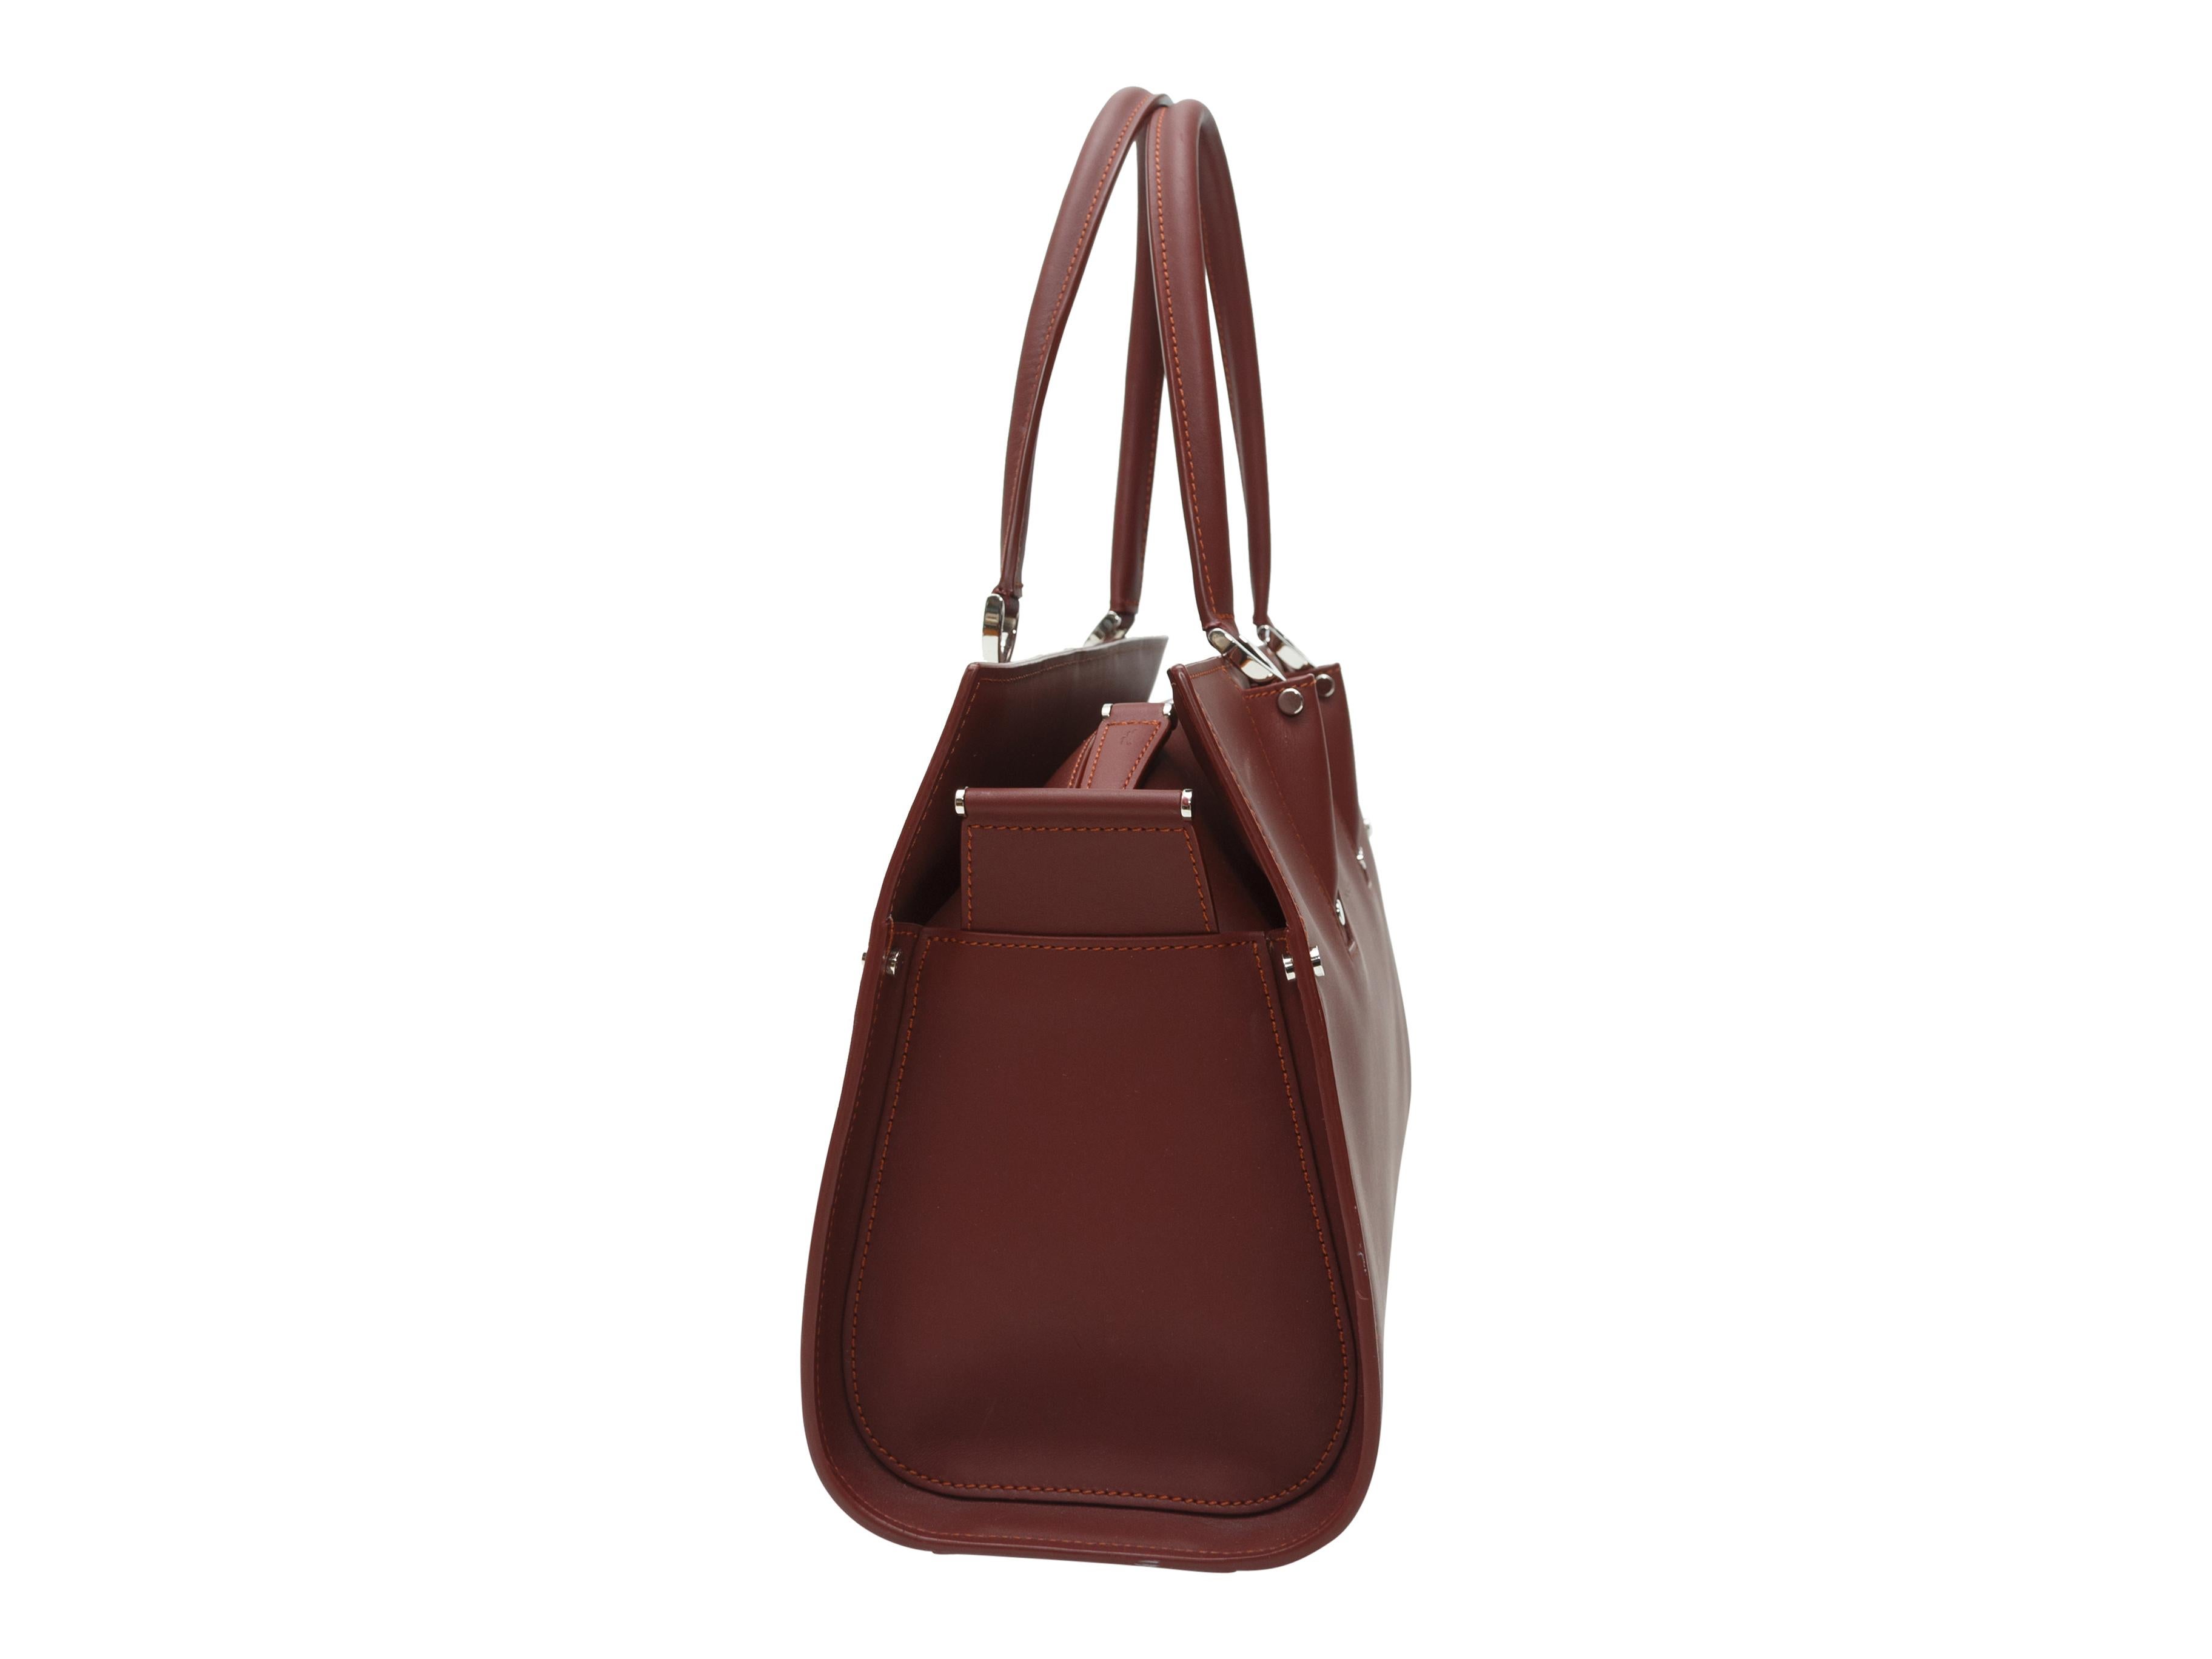 Product details: Burgundy rectangular leather handbag by Longchamp. Dual rolled top handles. Silver-tone hardware. Zip closure at top. 14